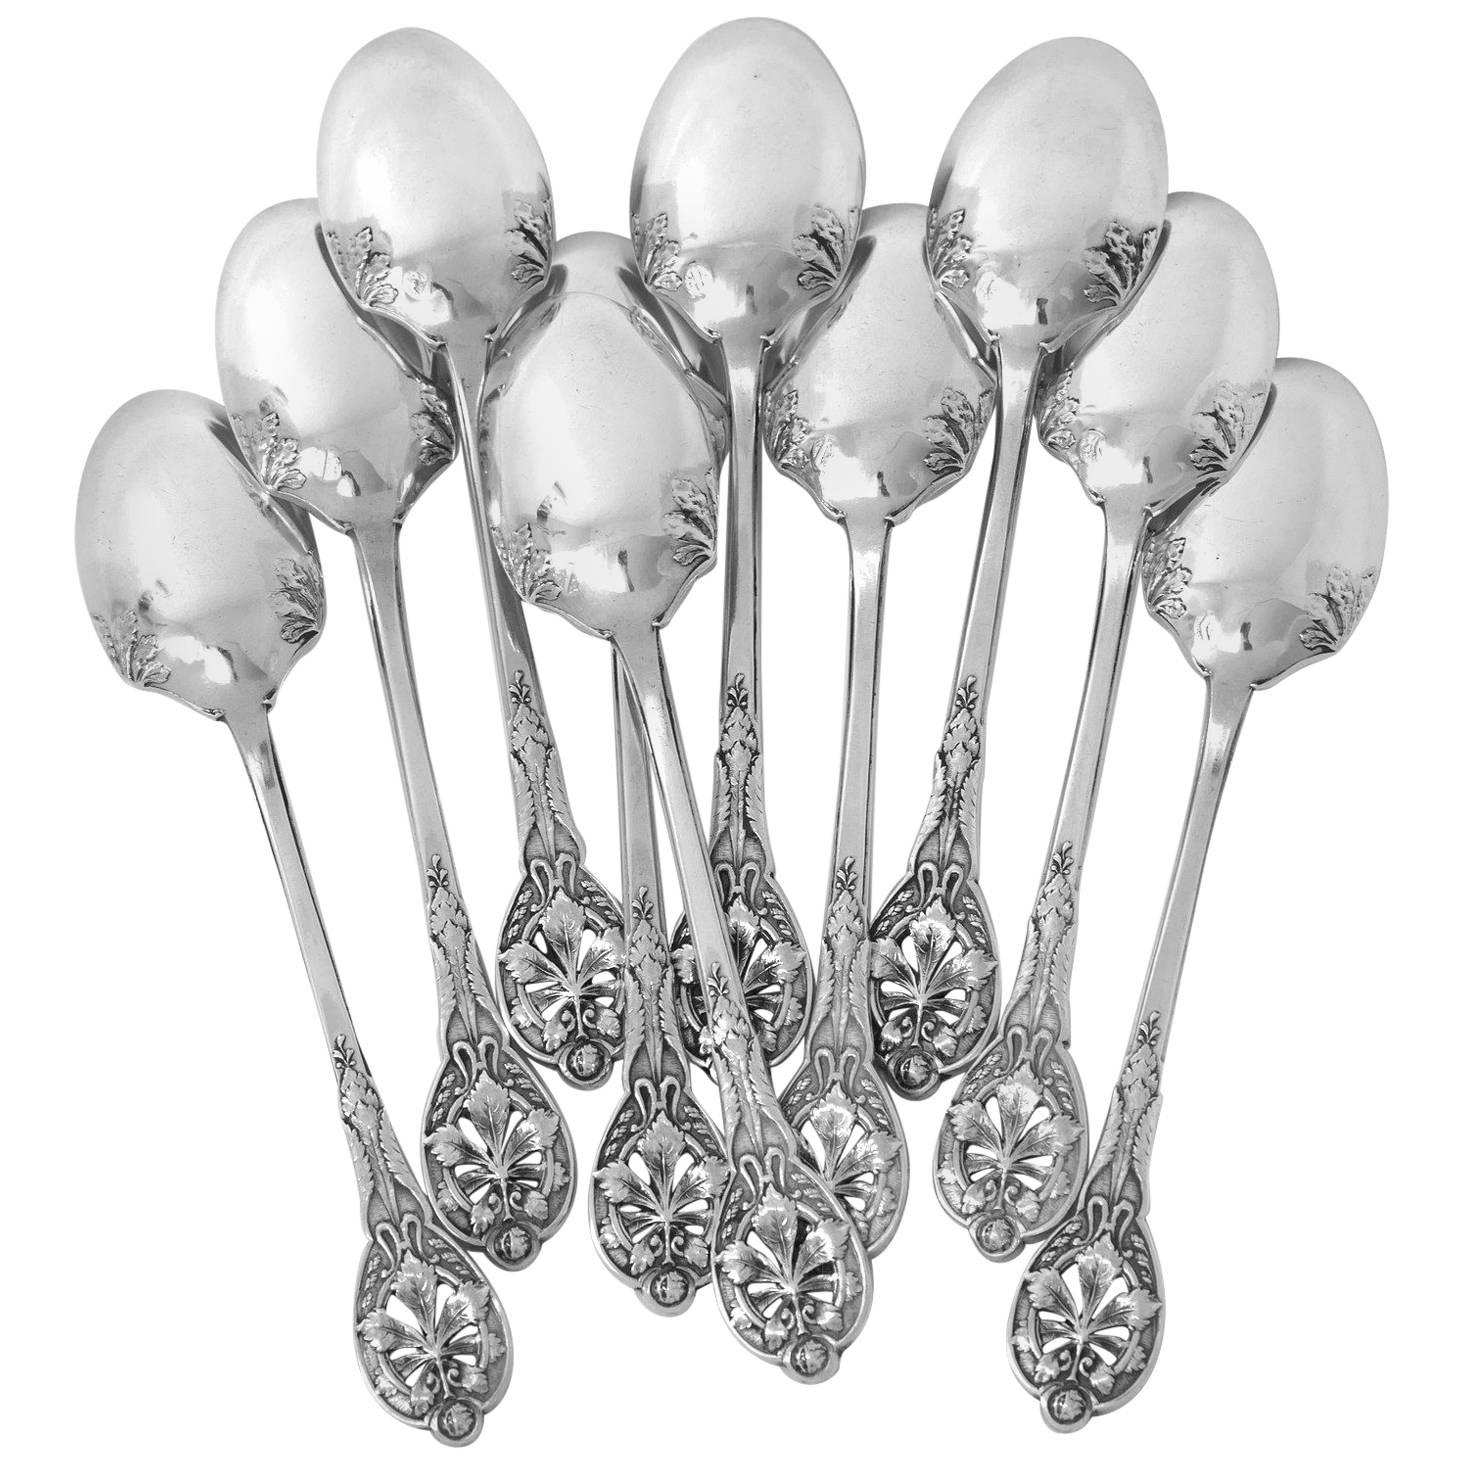 Henin Masterpiece French Sterling Silver Tea Coffee Spoons Set Chestnut Leaves